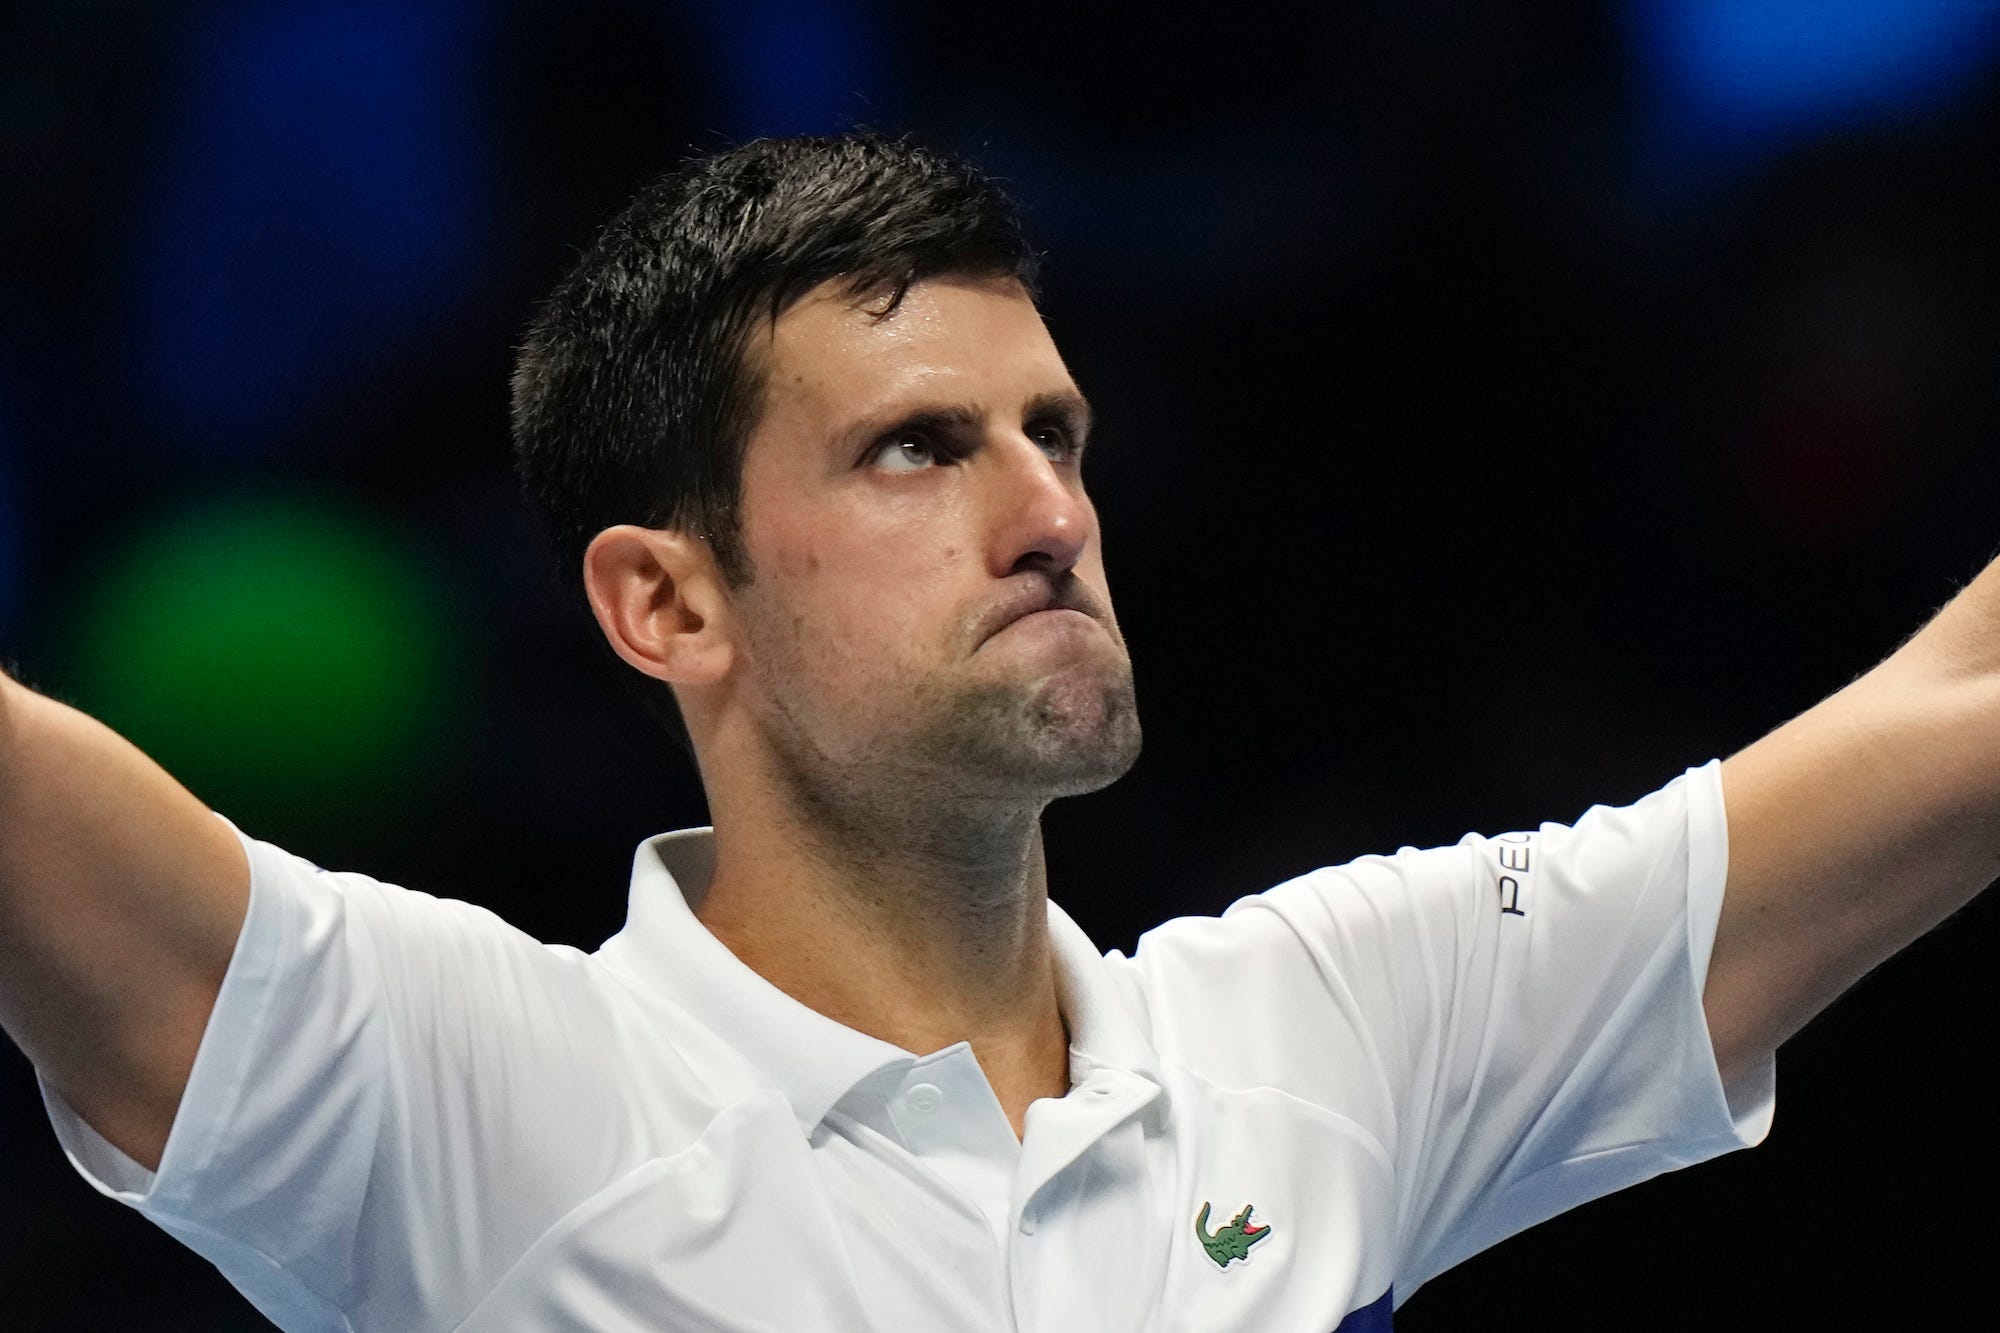 Novak Djokovic raises his arms and looks at the crowd after a match in 2021.